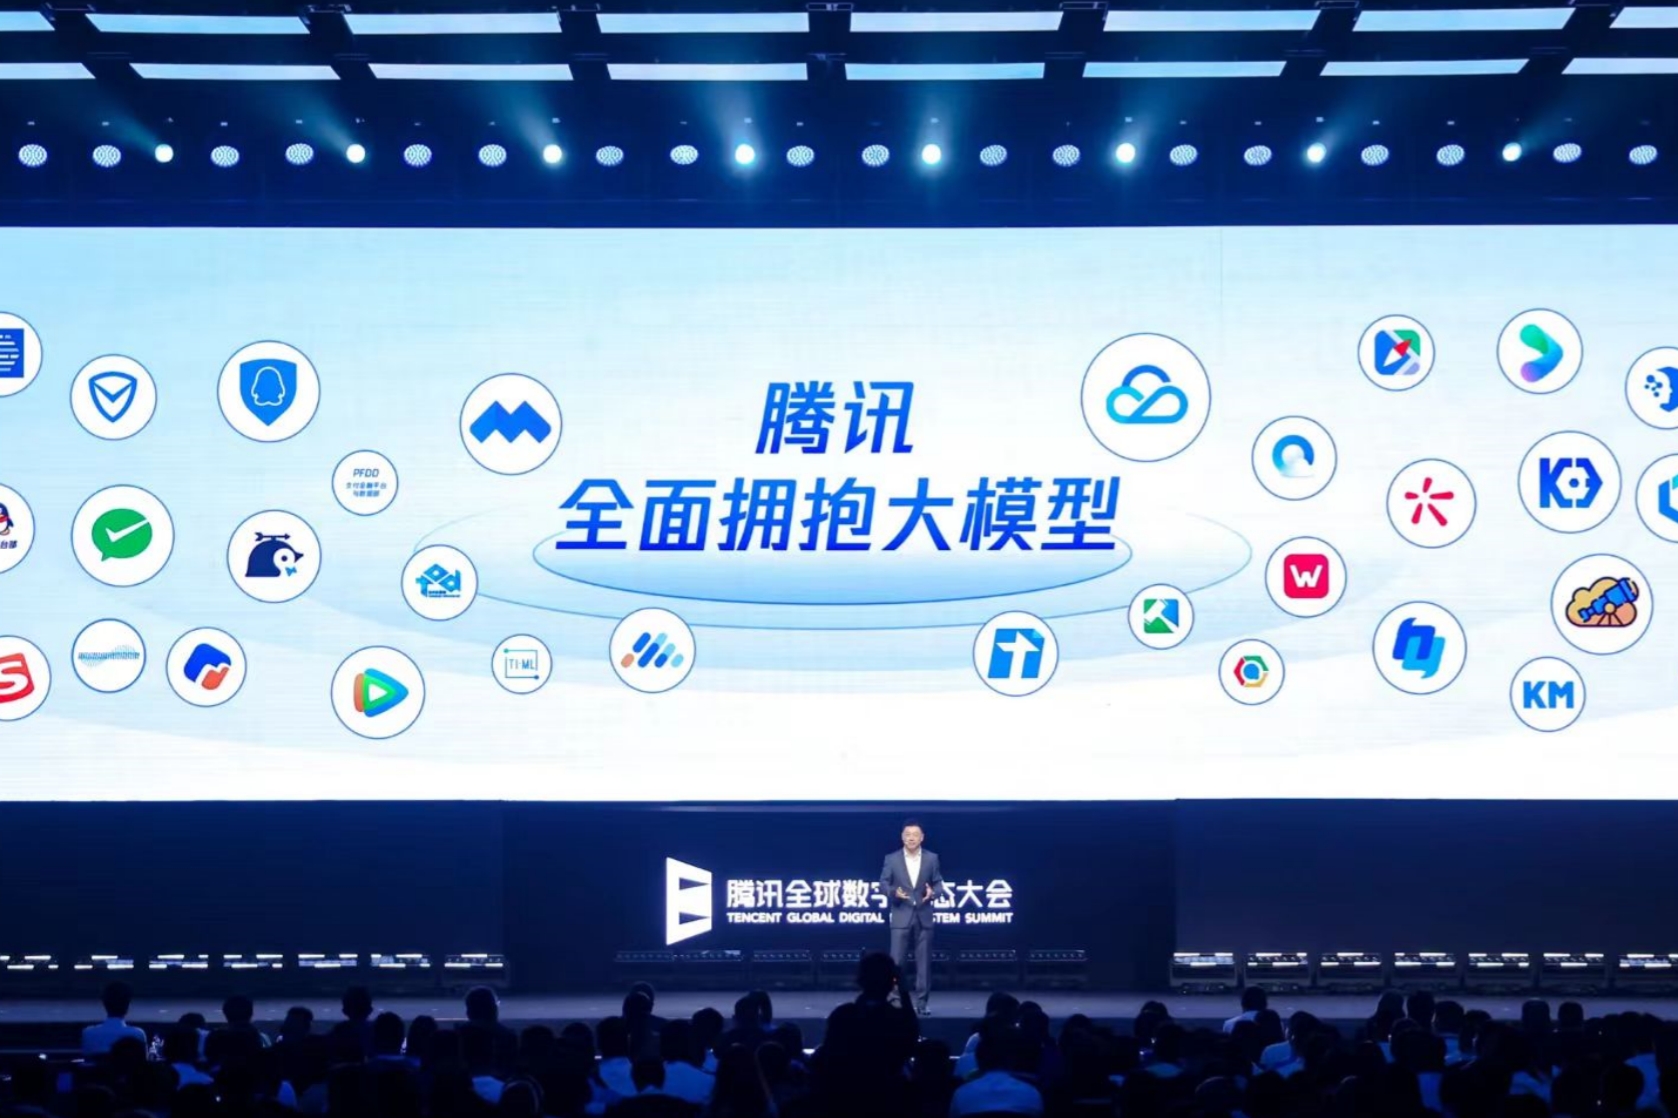 Tencent unveiled its large language model Hunyuan on Thursday at it's Global Digital Ecosystem Summit. Photo: Courtesy of Tencent